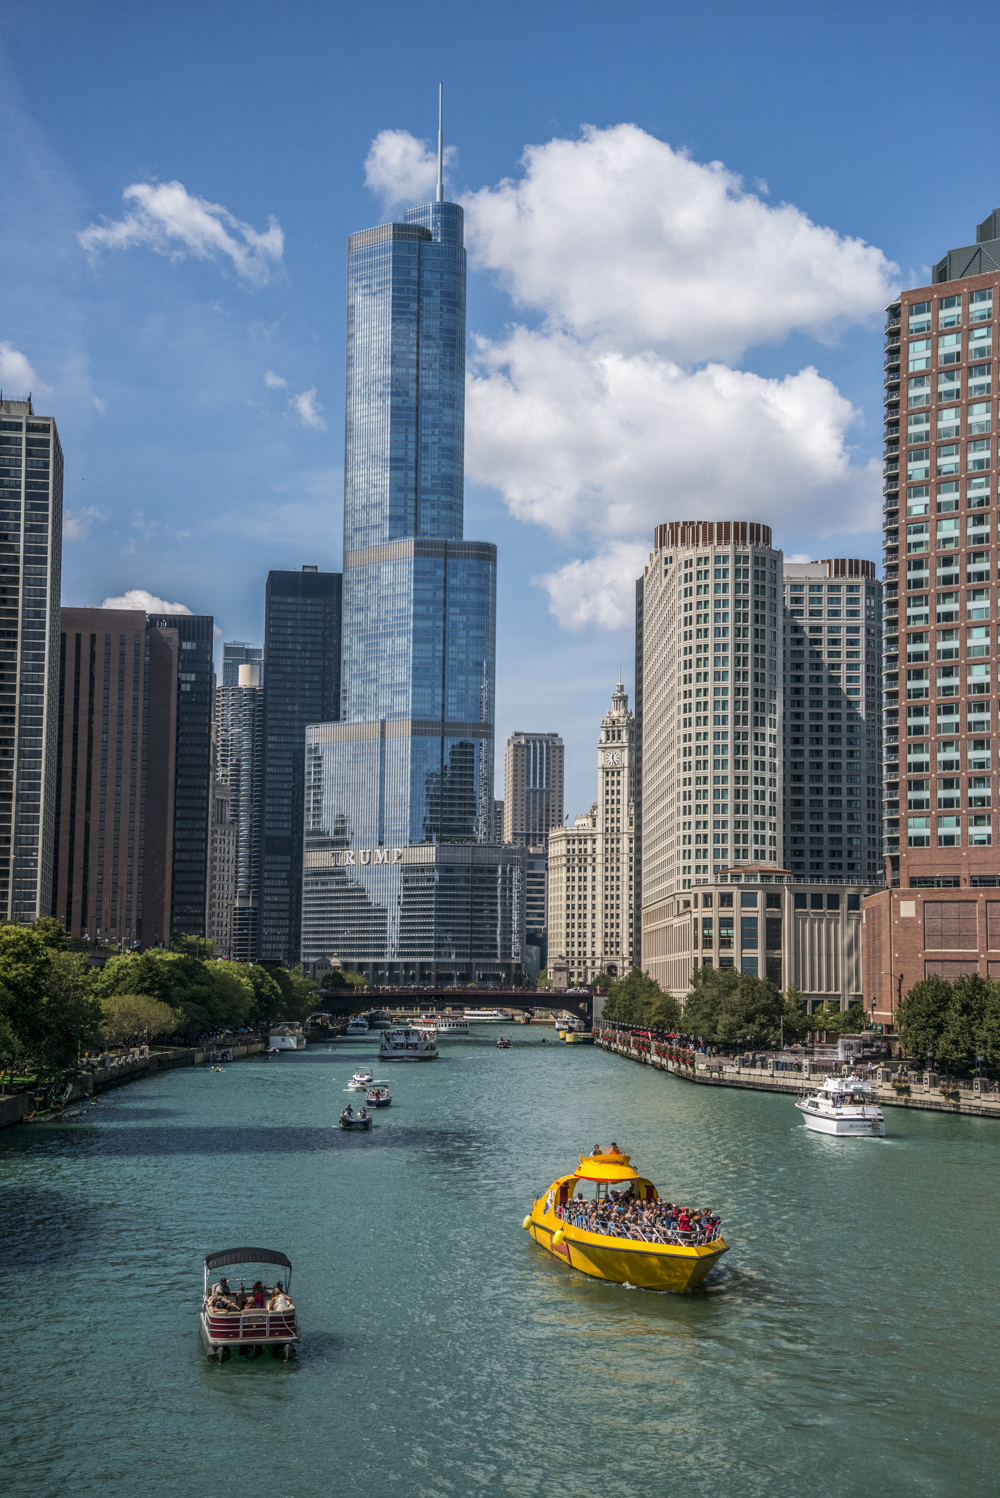 Chicago River And Trump Tower by Allan Hartley